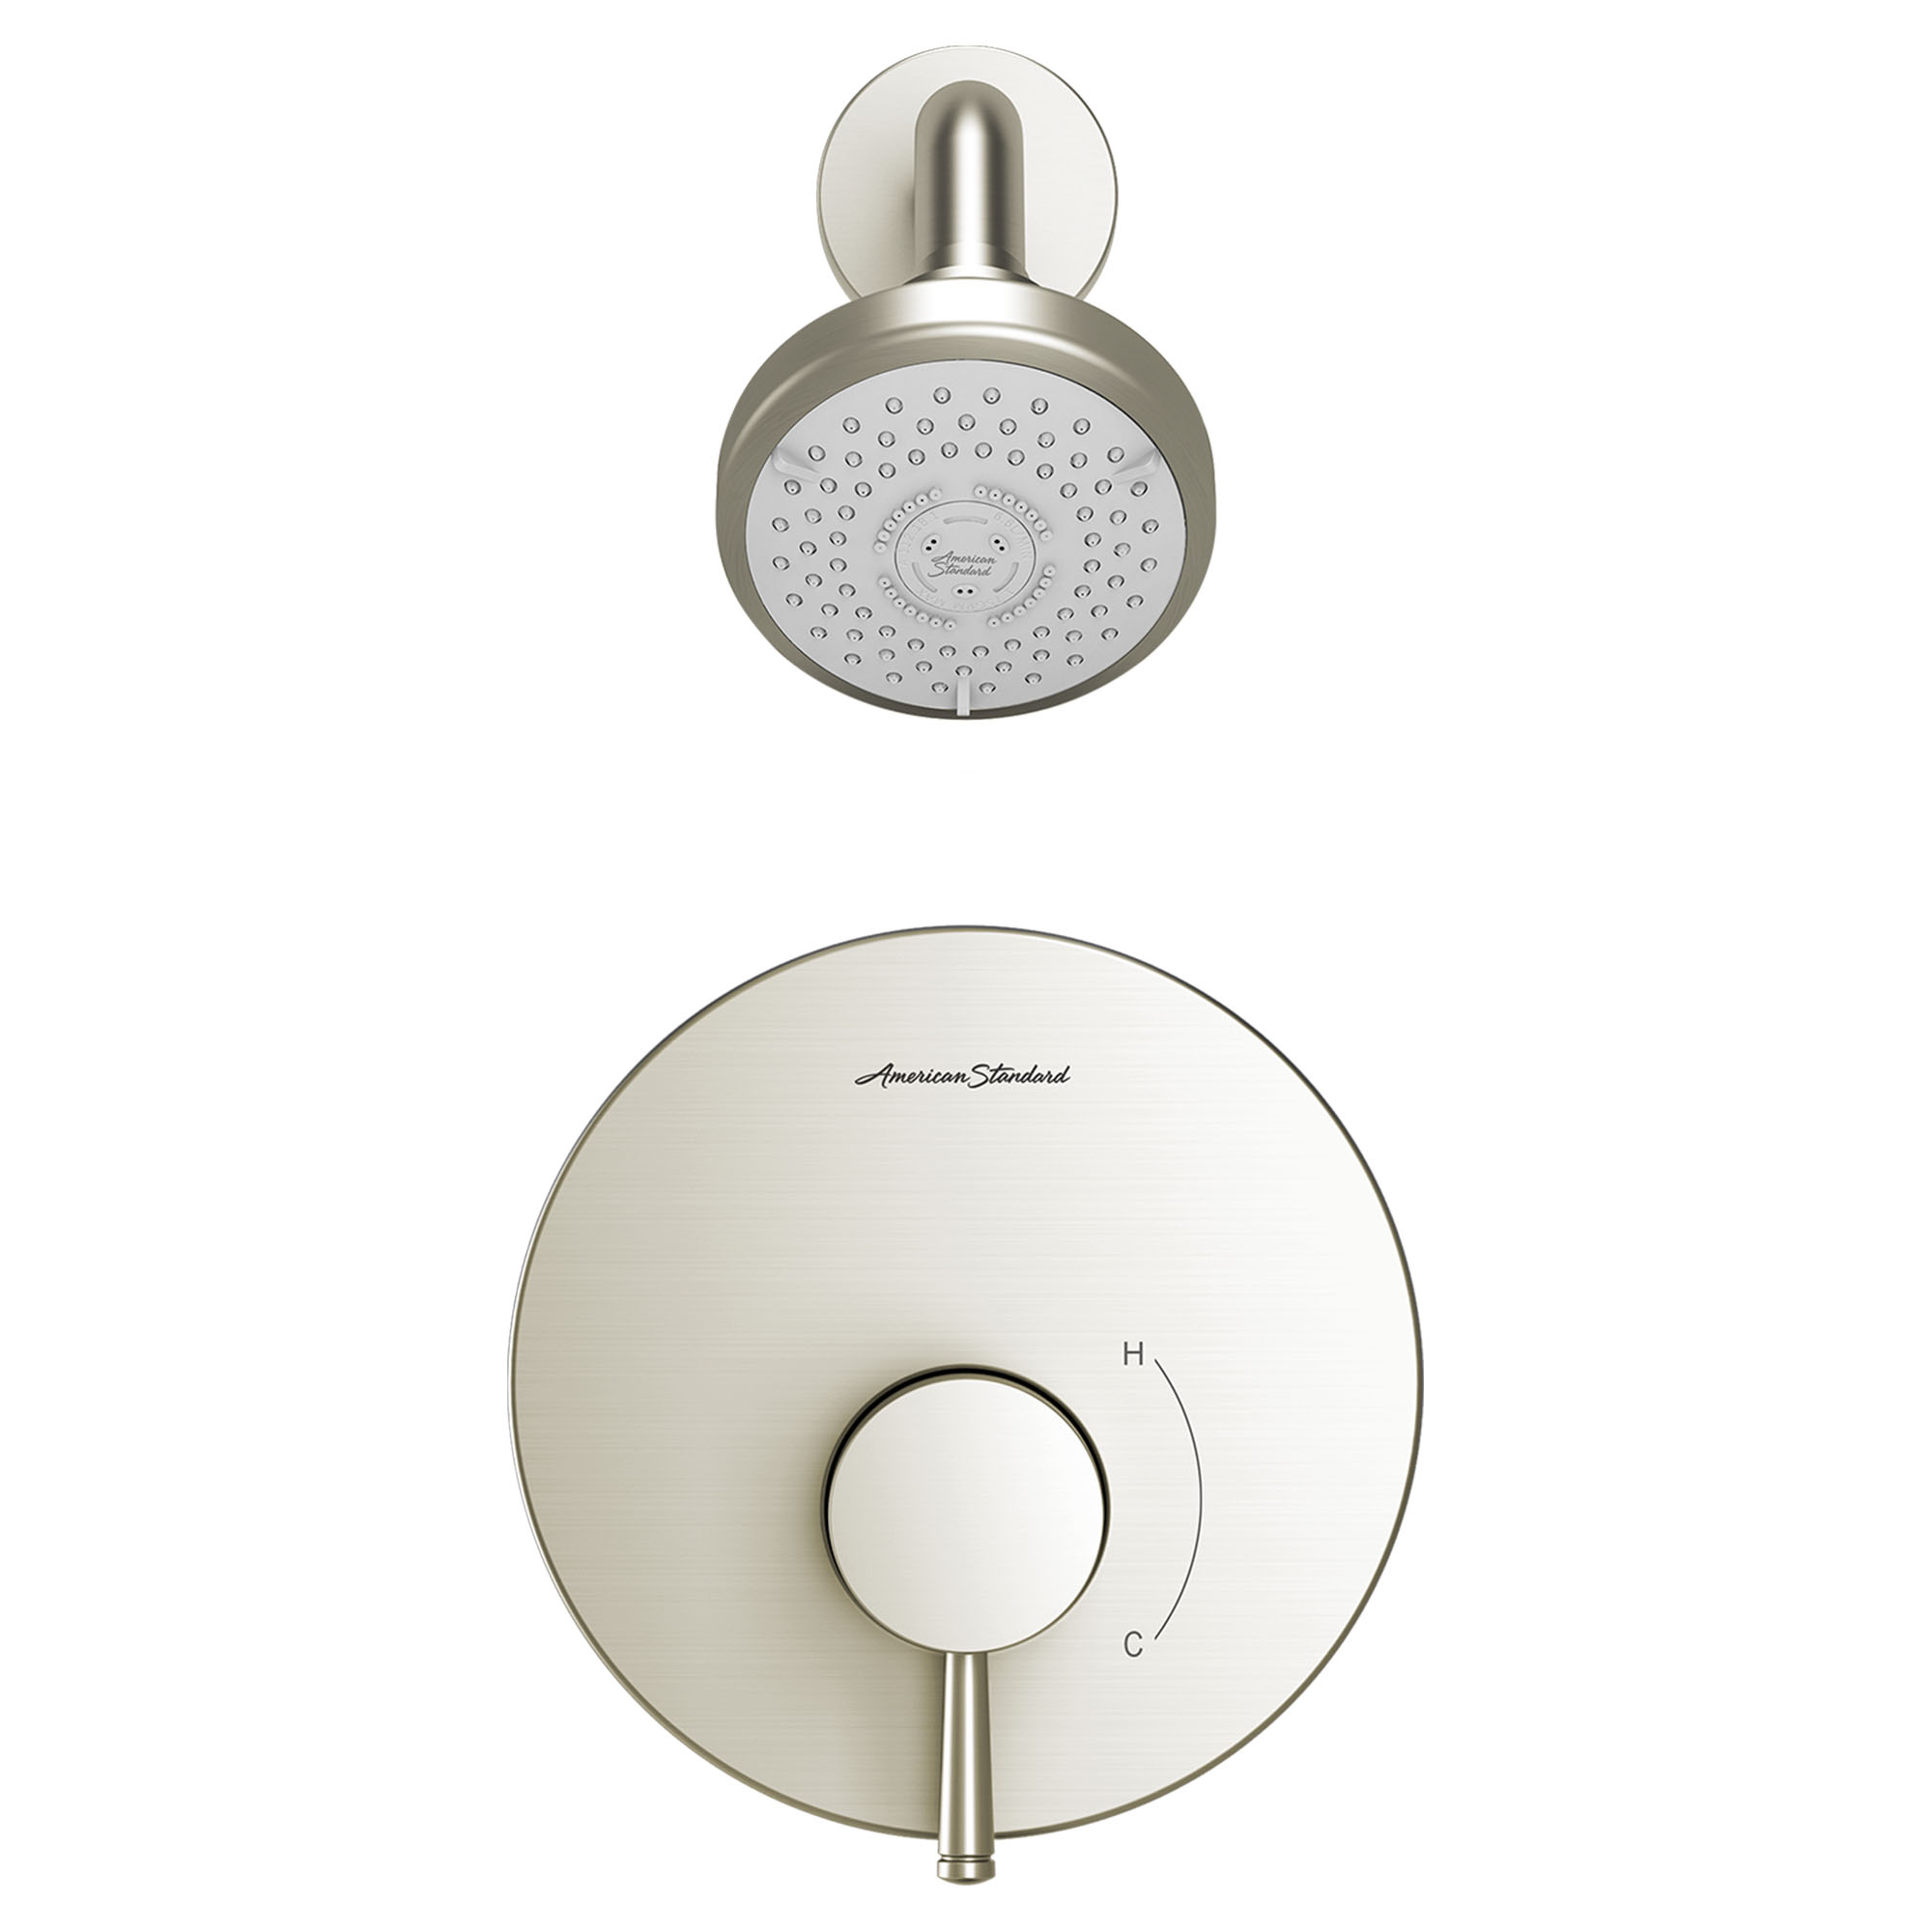 Serin™ 1.75 gpm/6.6 L/min Tub and Shower Trim Kit With Water-Saving 3-Function Shower Head, Double Ceramic Pressure Balance Cartridge With Lever Handle